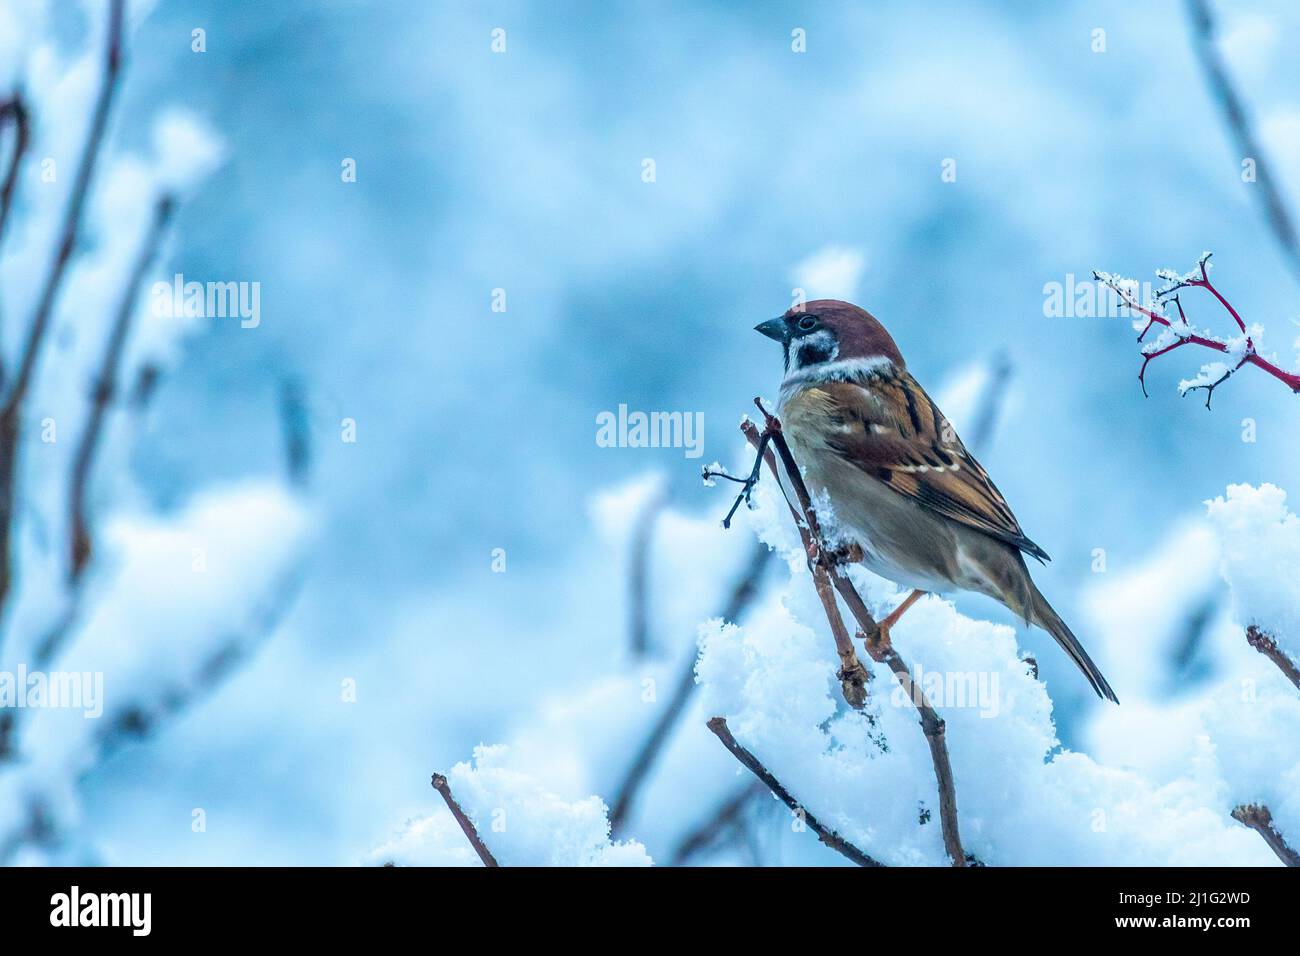 male house sparrow (Passer domesticus) sitting on a snowy twig in winter Stock Photo